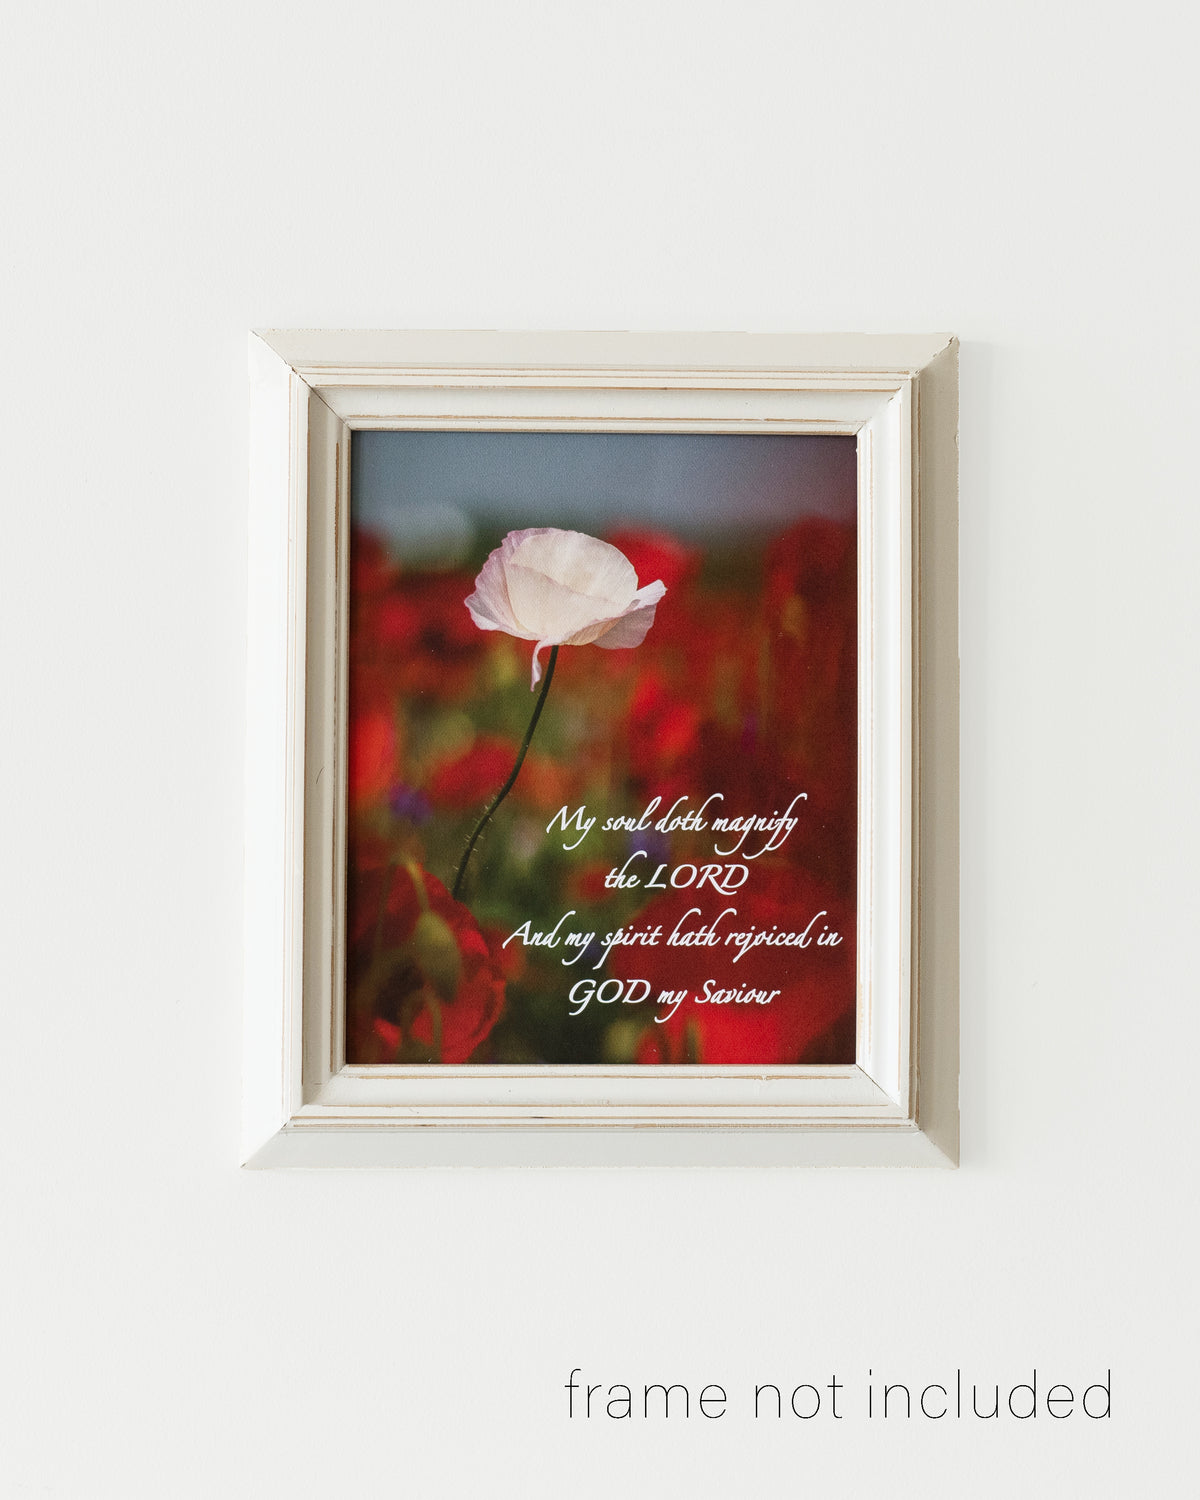 Framed print of Poppy Field with red, purple, blue, and white flowers in Enon, Ohio with scripture verse